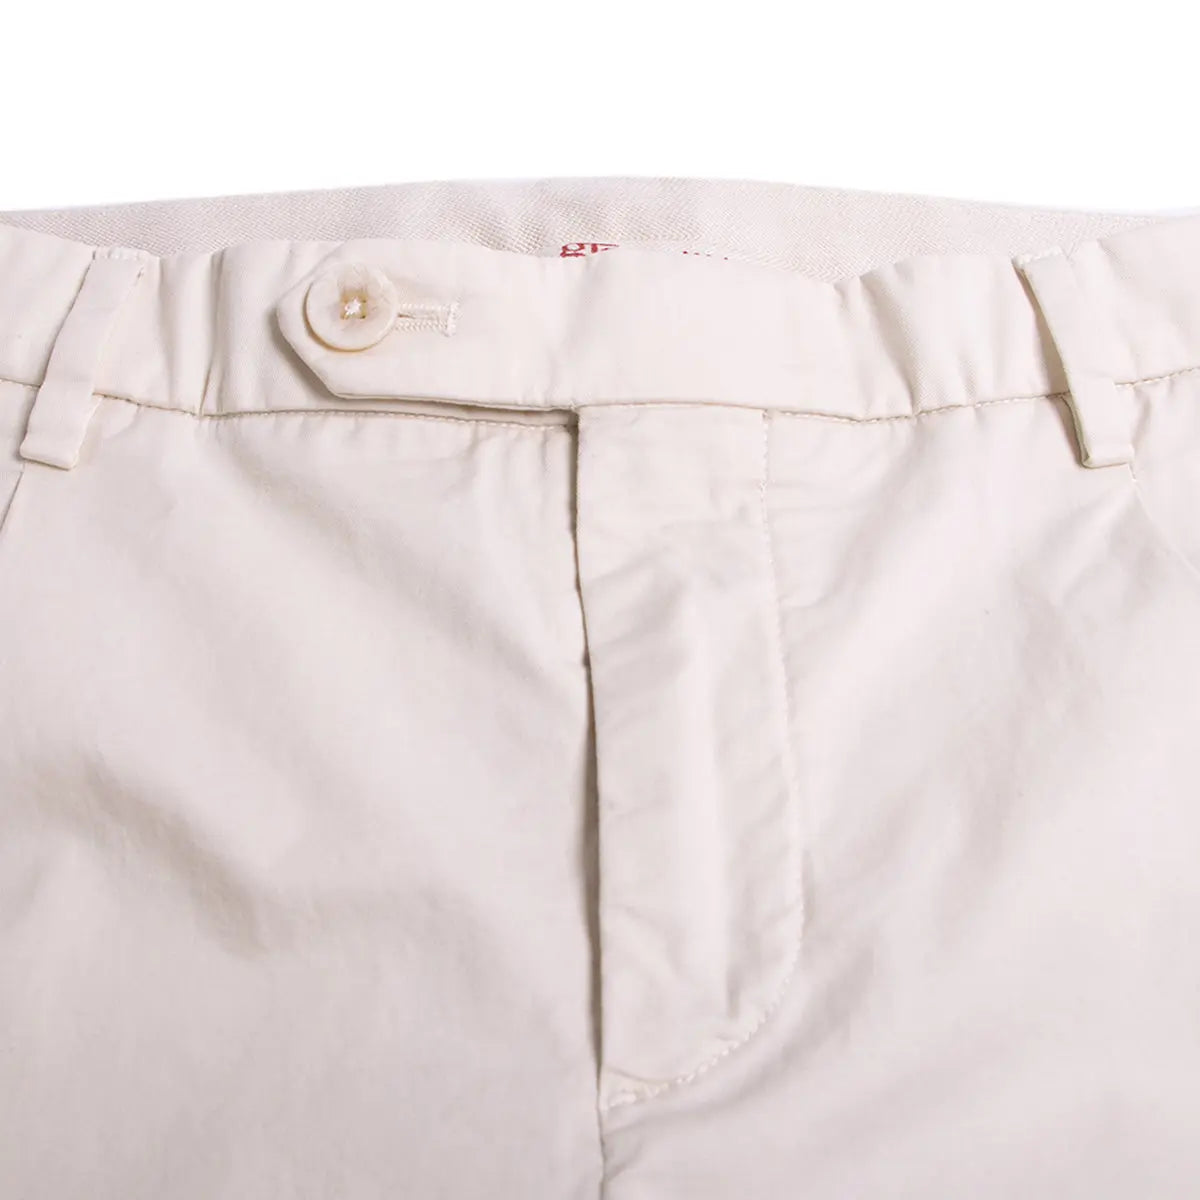 Butter Cotton Stretch Chino Shorts Robert Old